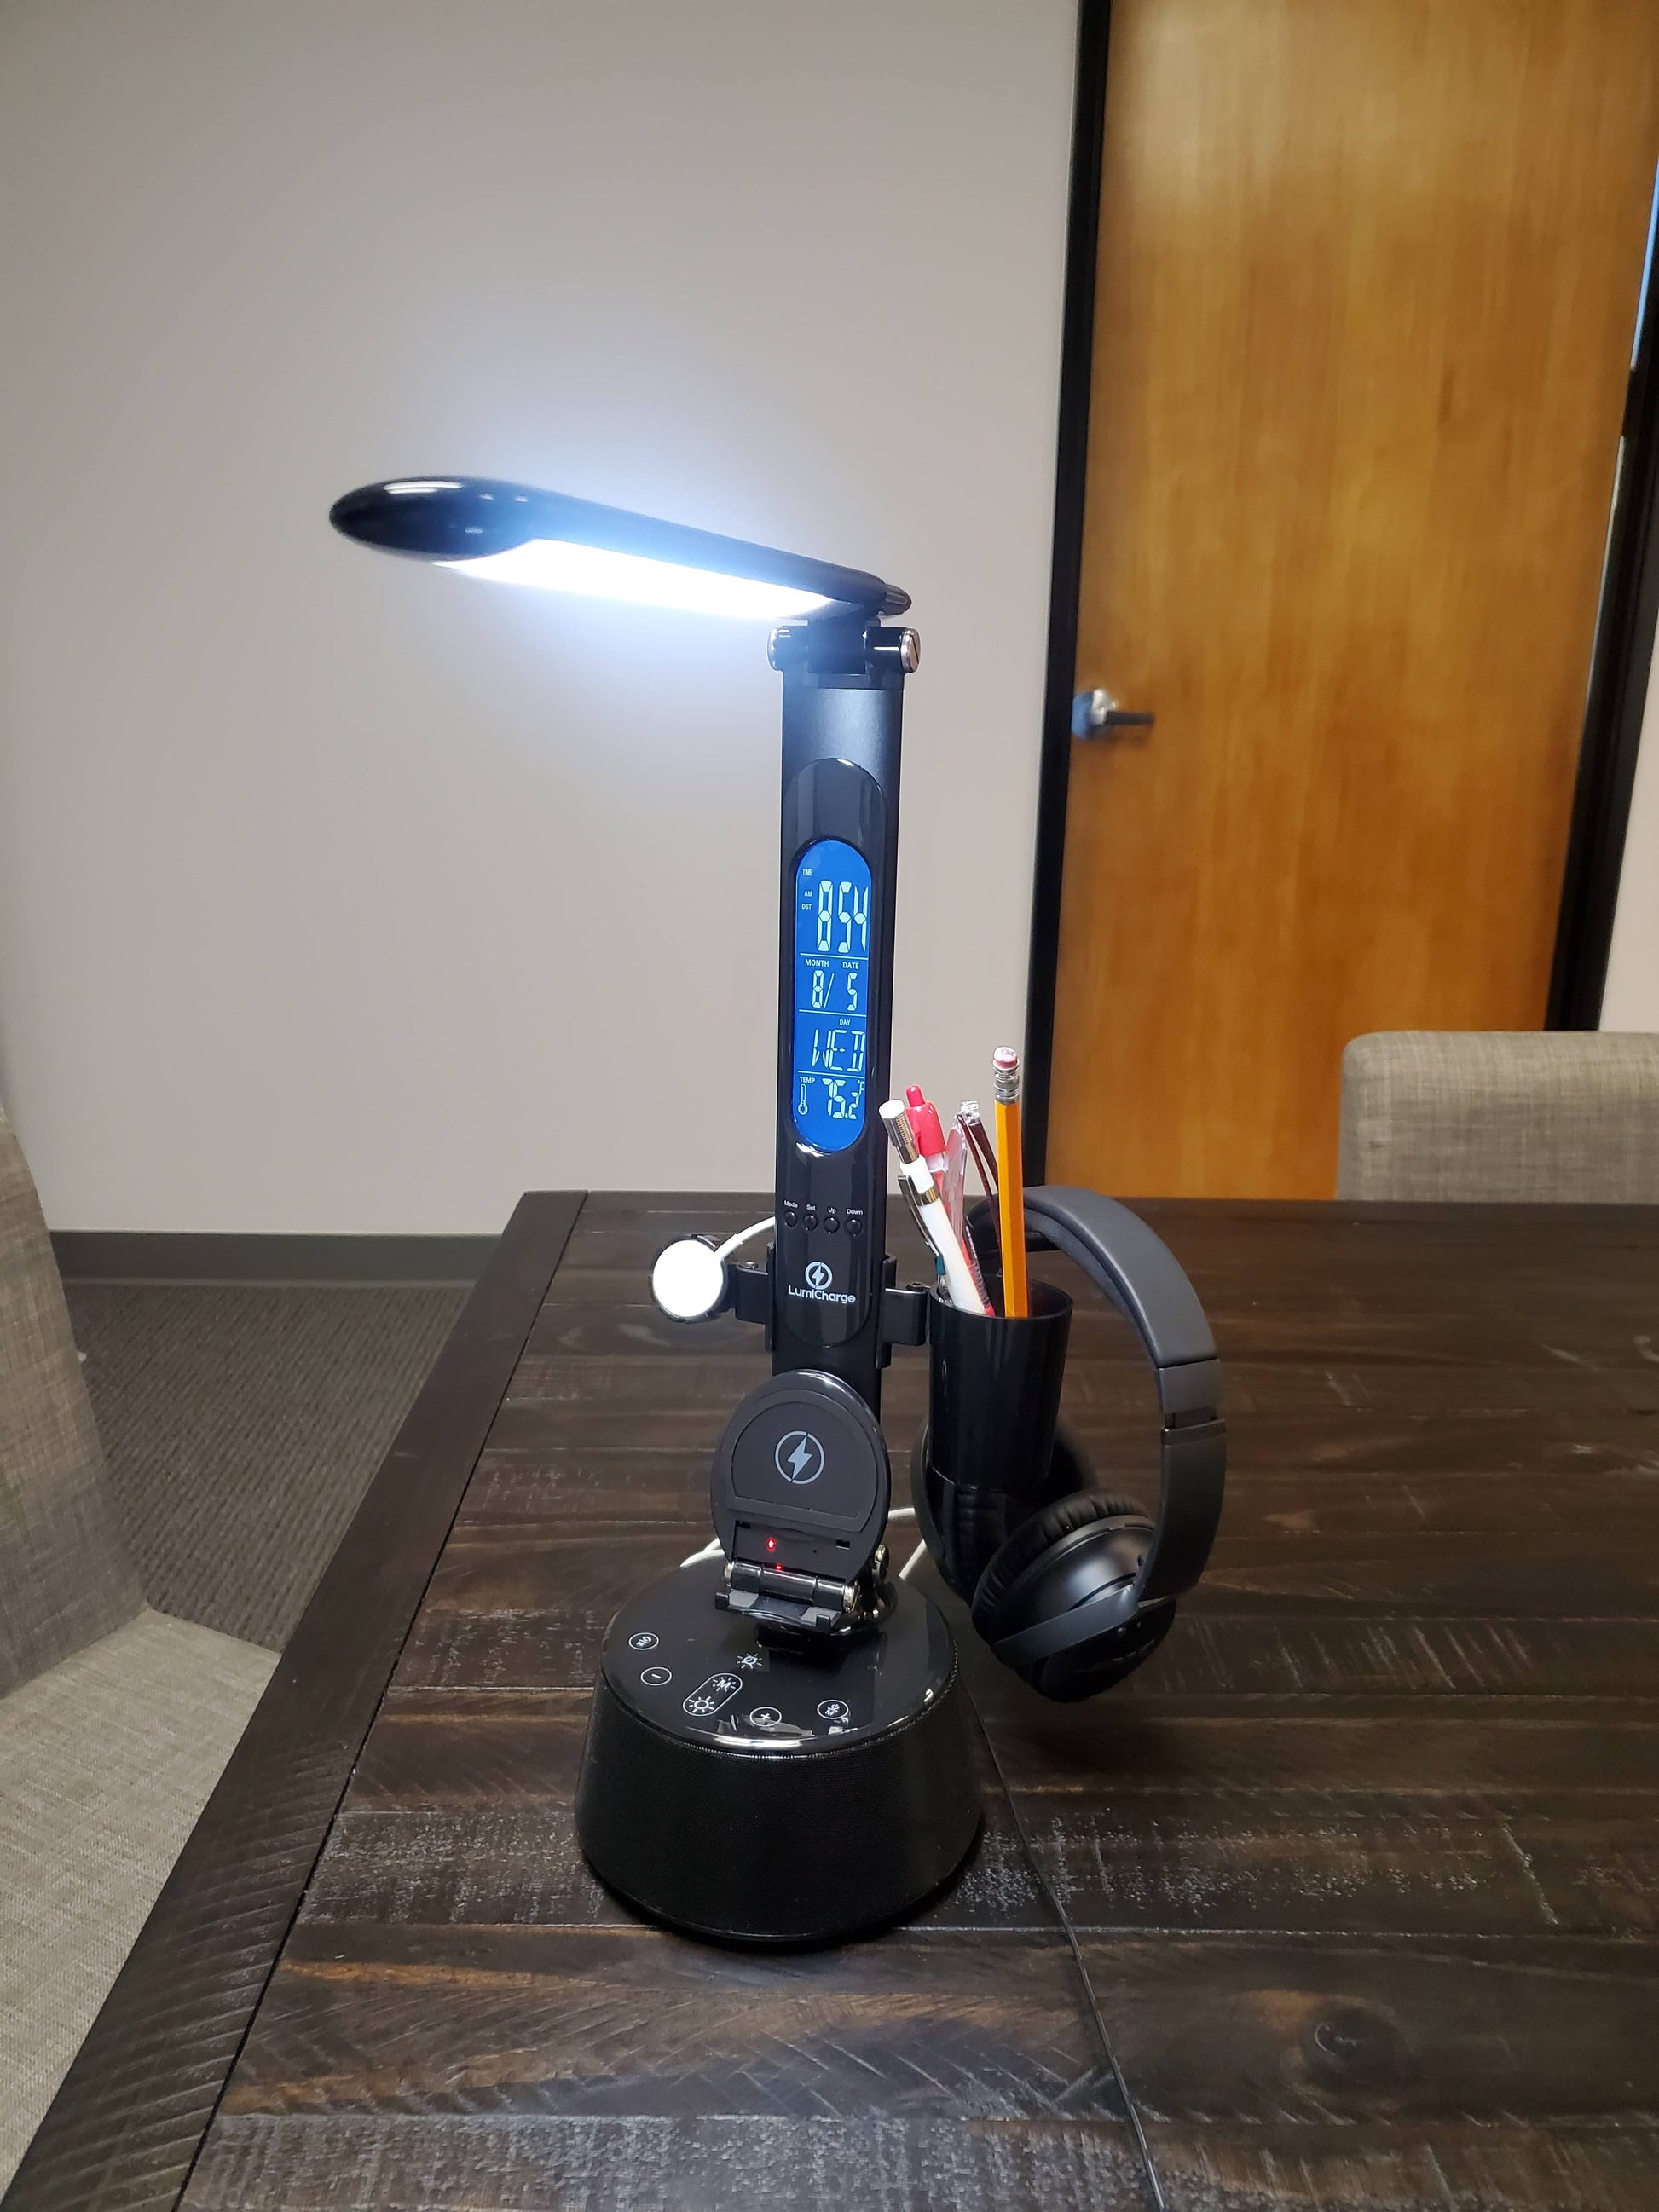 Lumicharge-T2W - LED Desk lamp with wireless charger and Bluetooth speaker